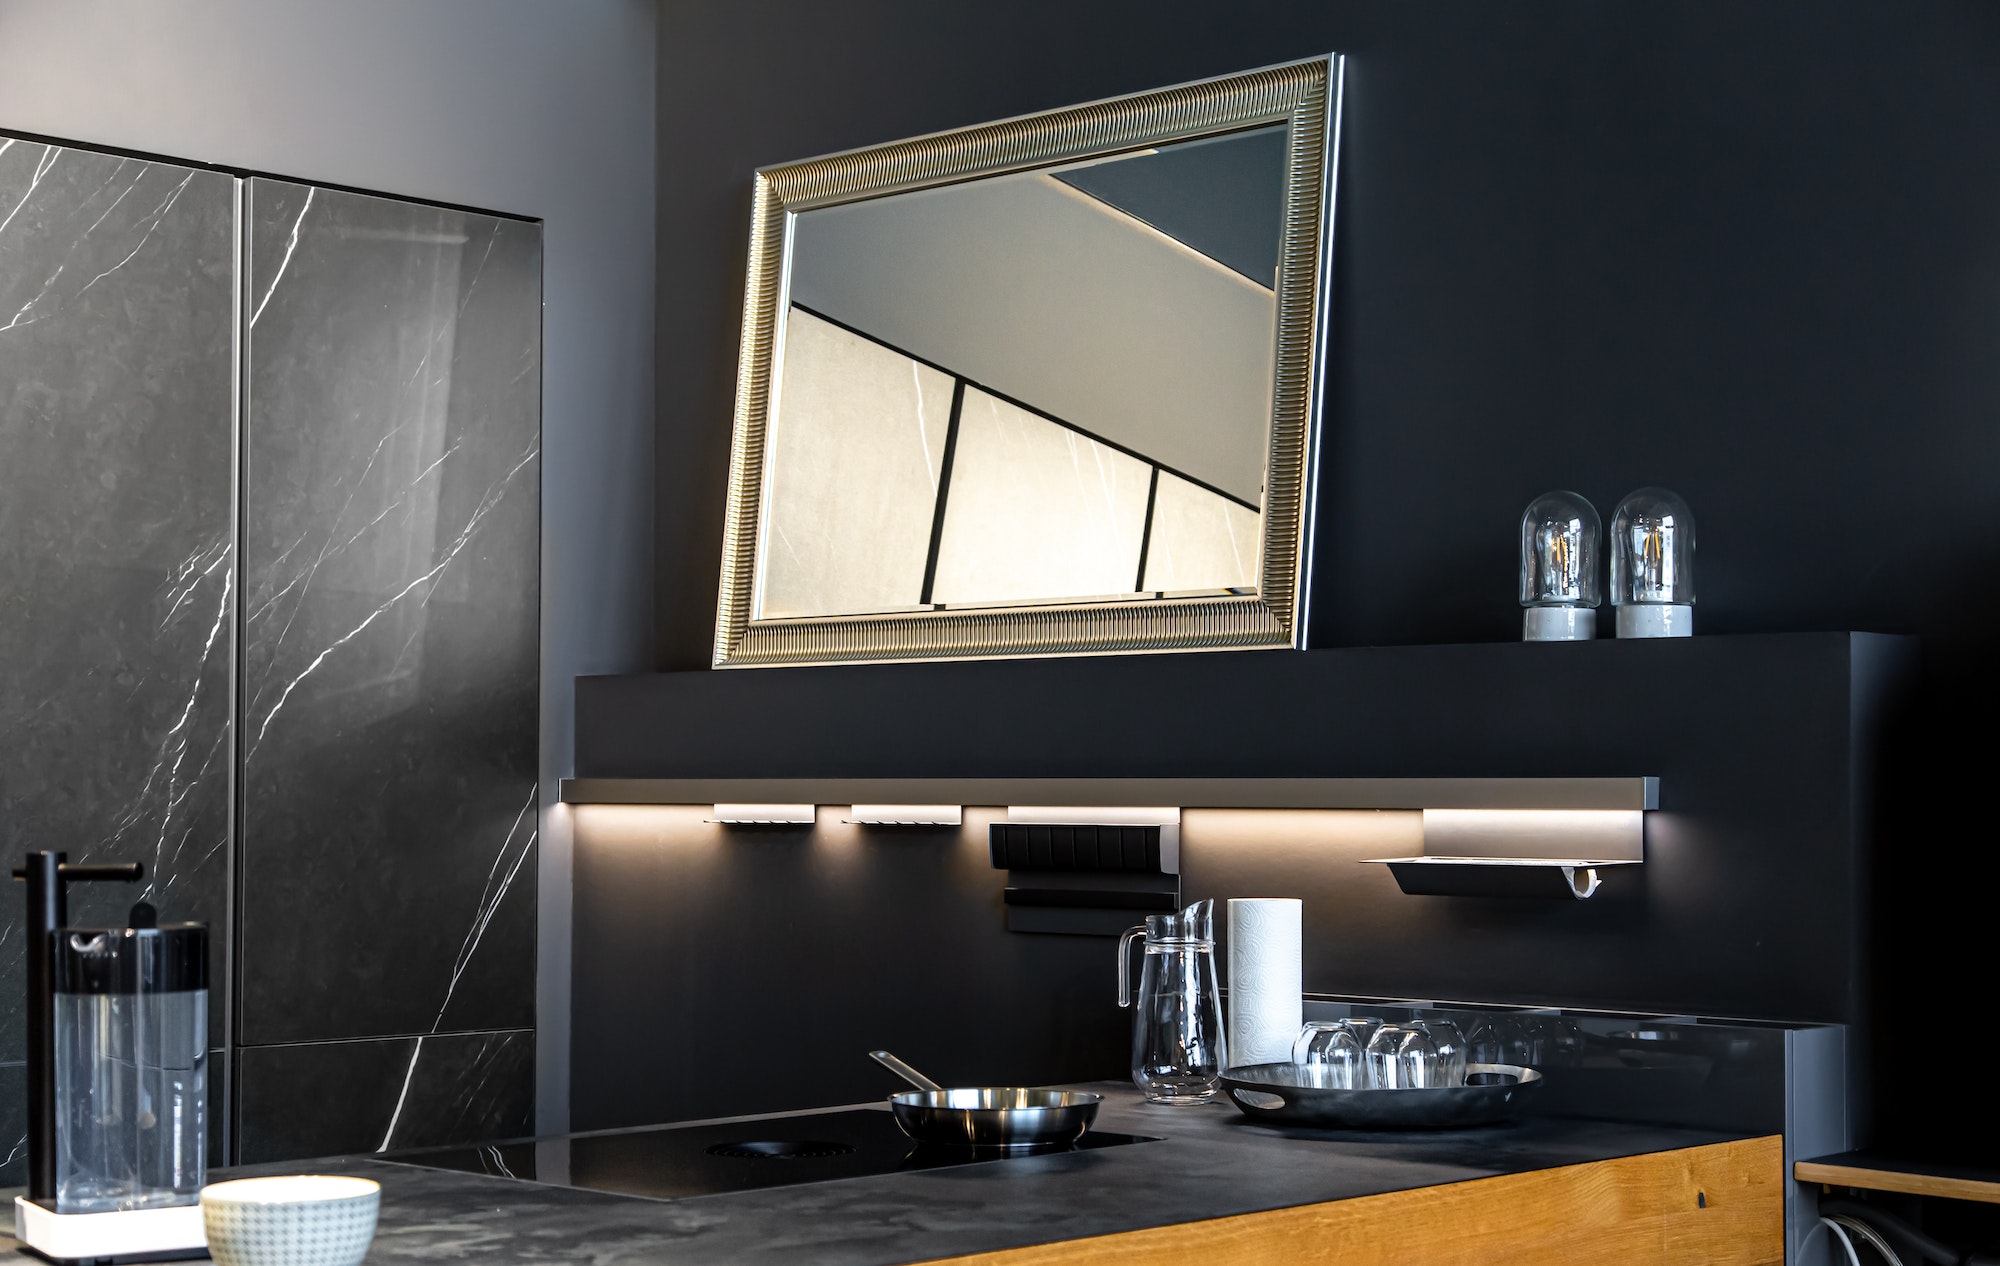 Part of the interior of the kitchen in black, modern minimalism.